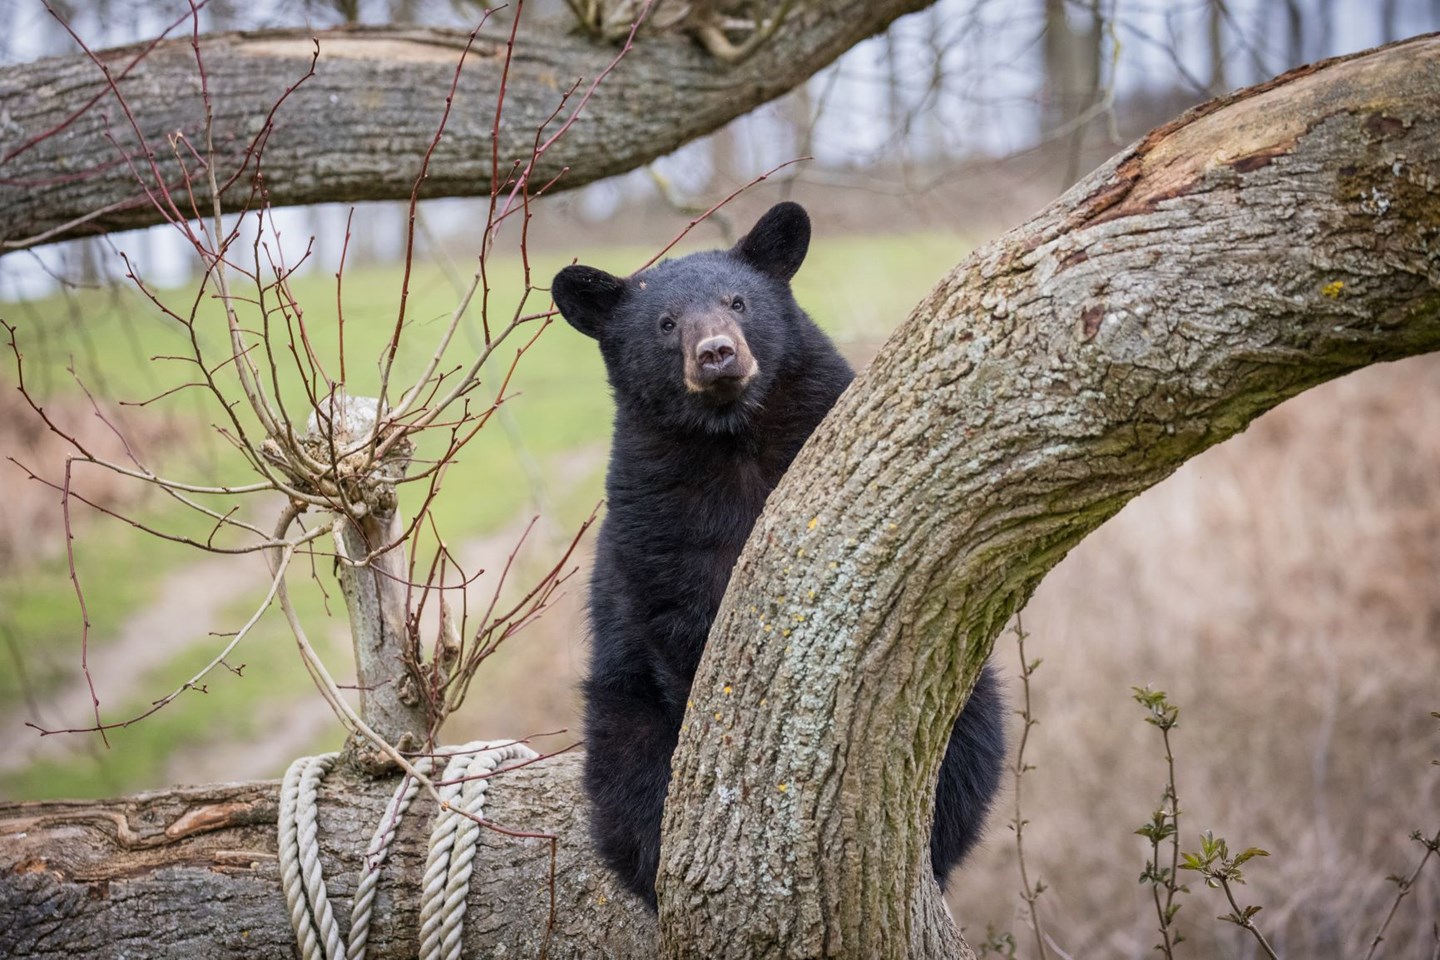 North American Black Bear peeks out from behind twisted logs in expansive grassy enclosure 